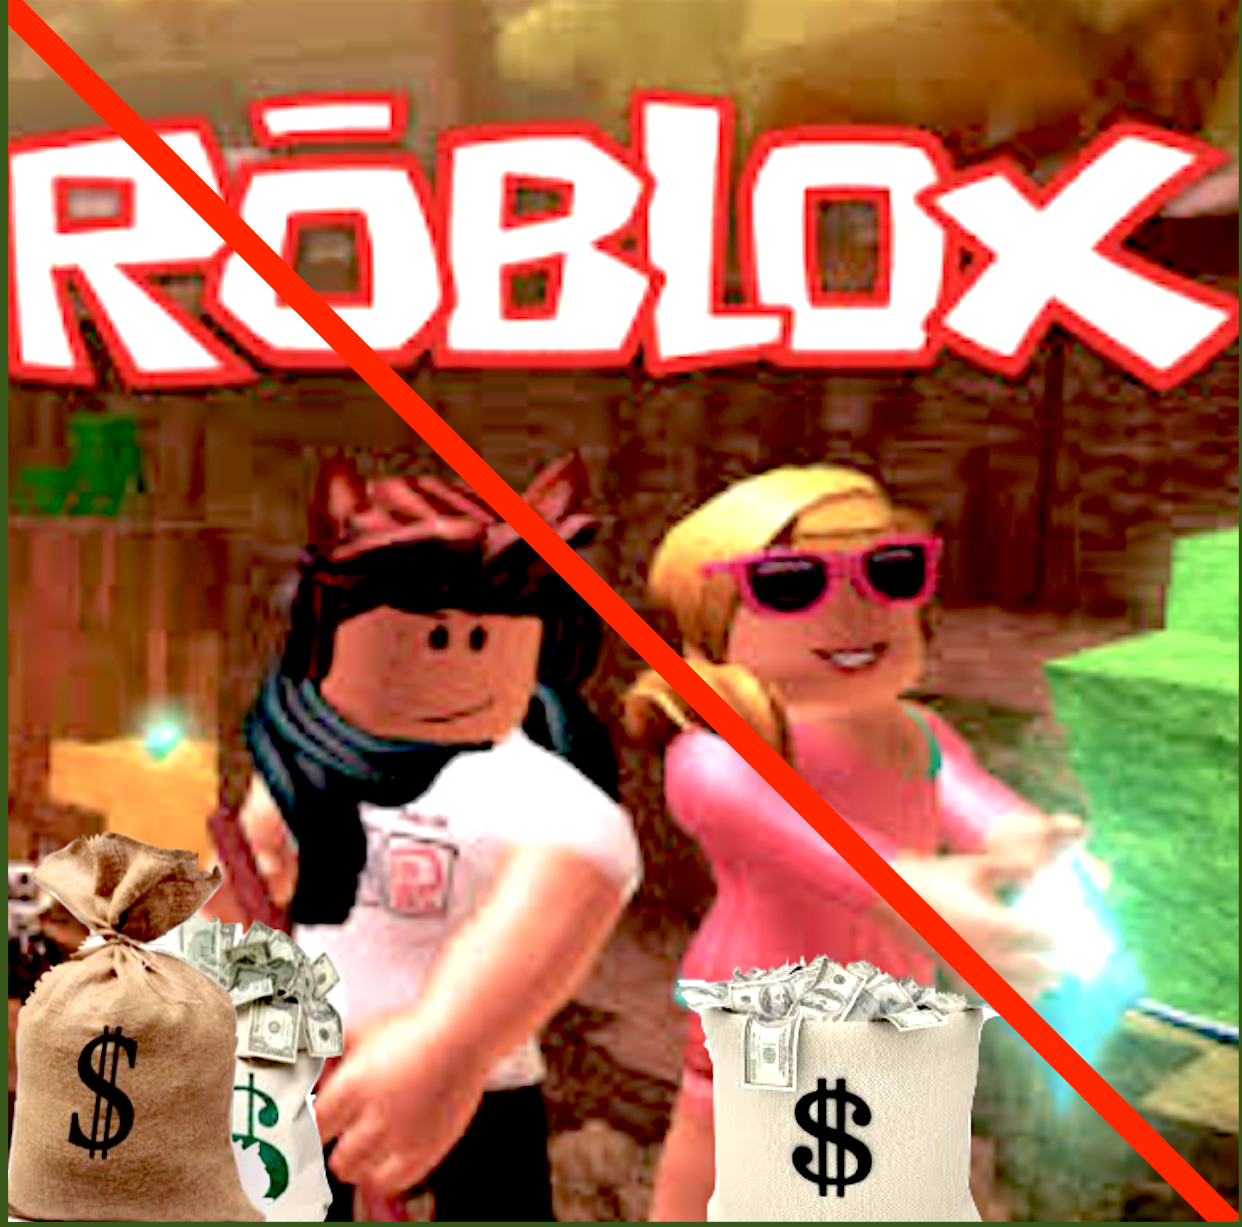 Dear roblox, this is completely unnecessary I can't even search